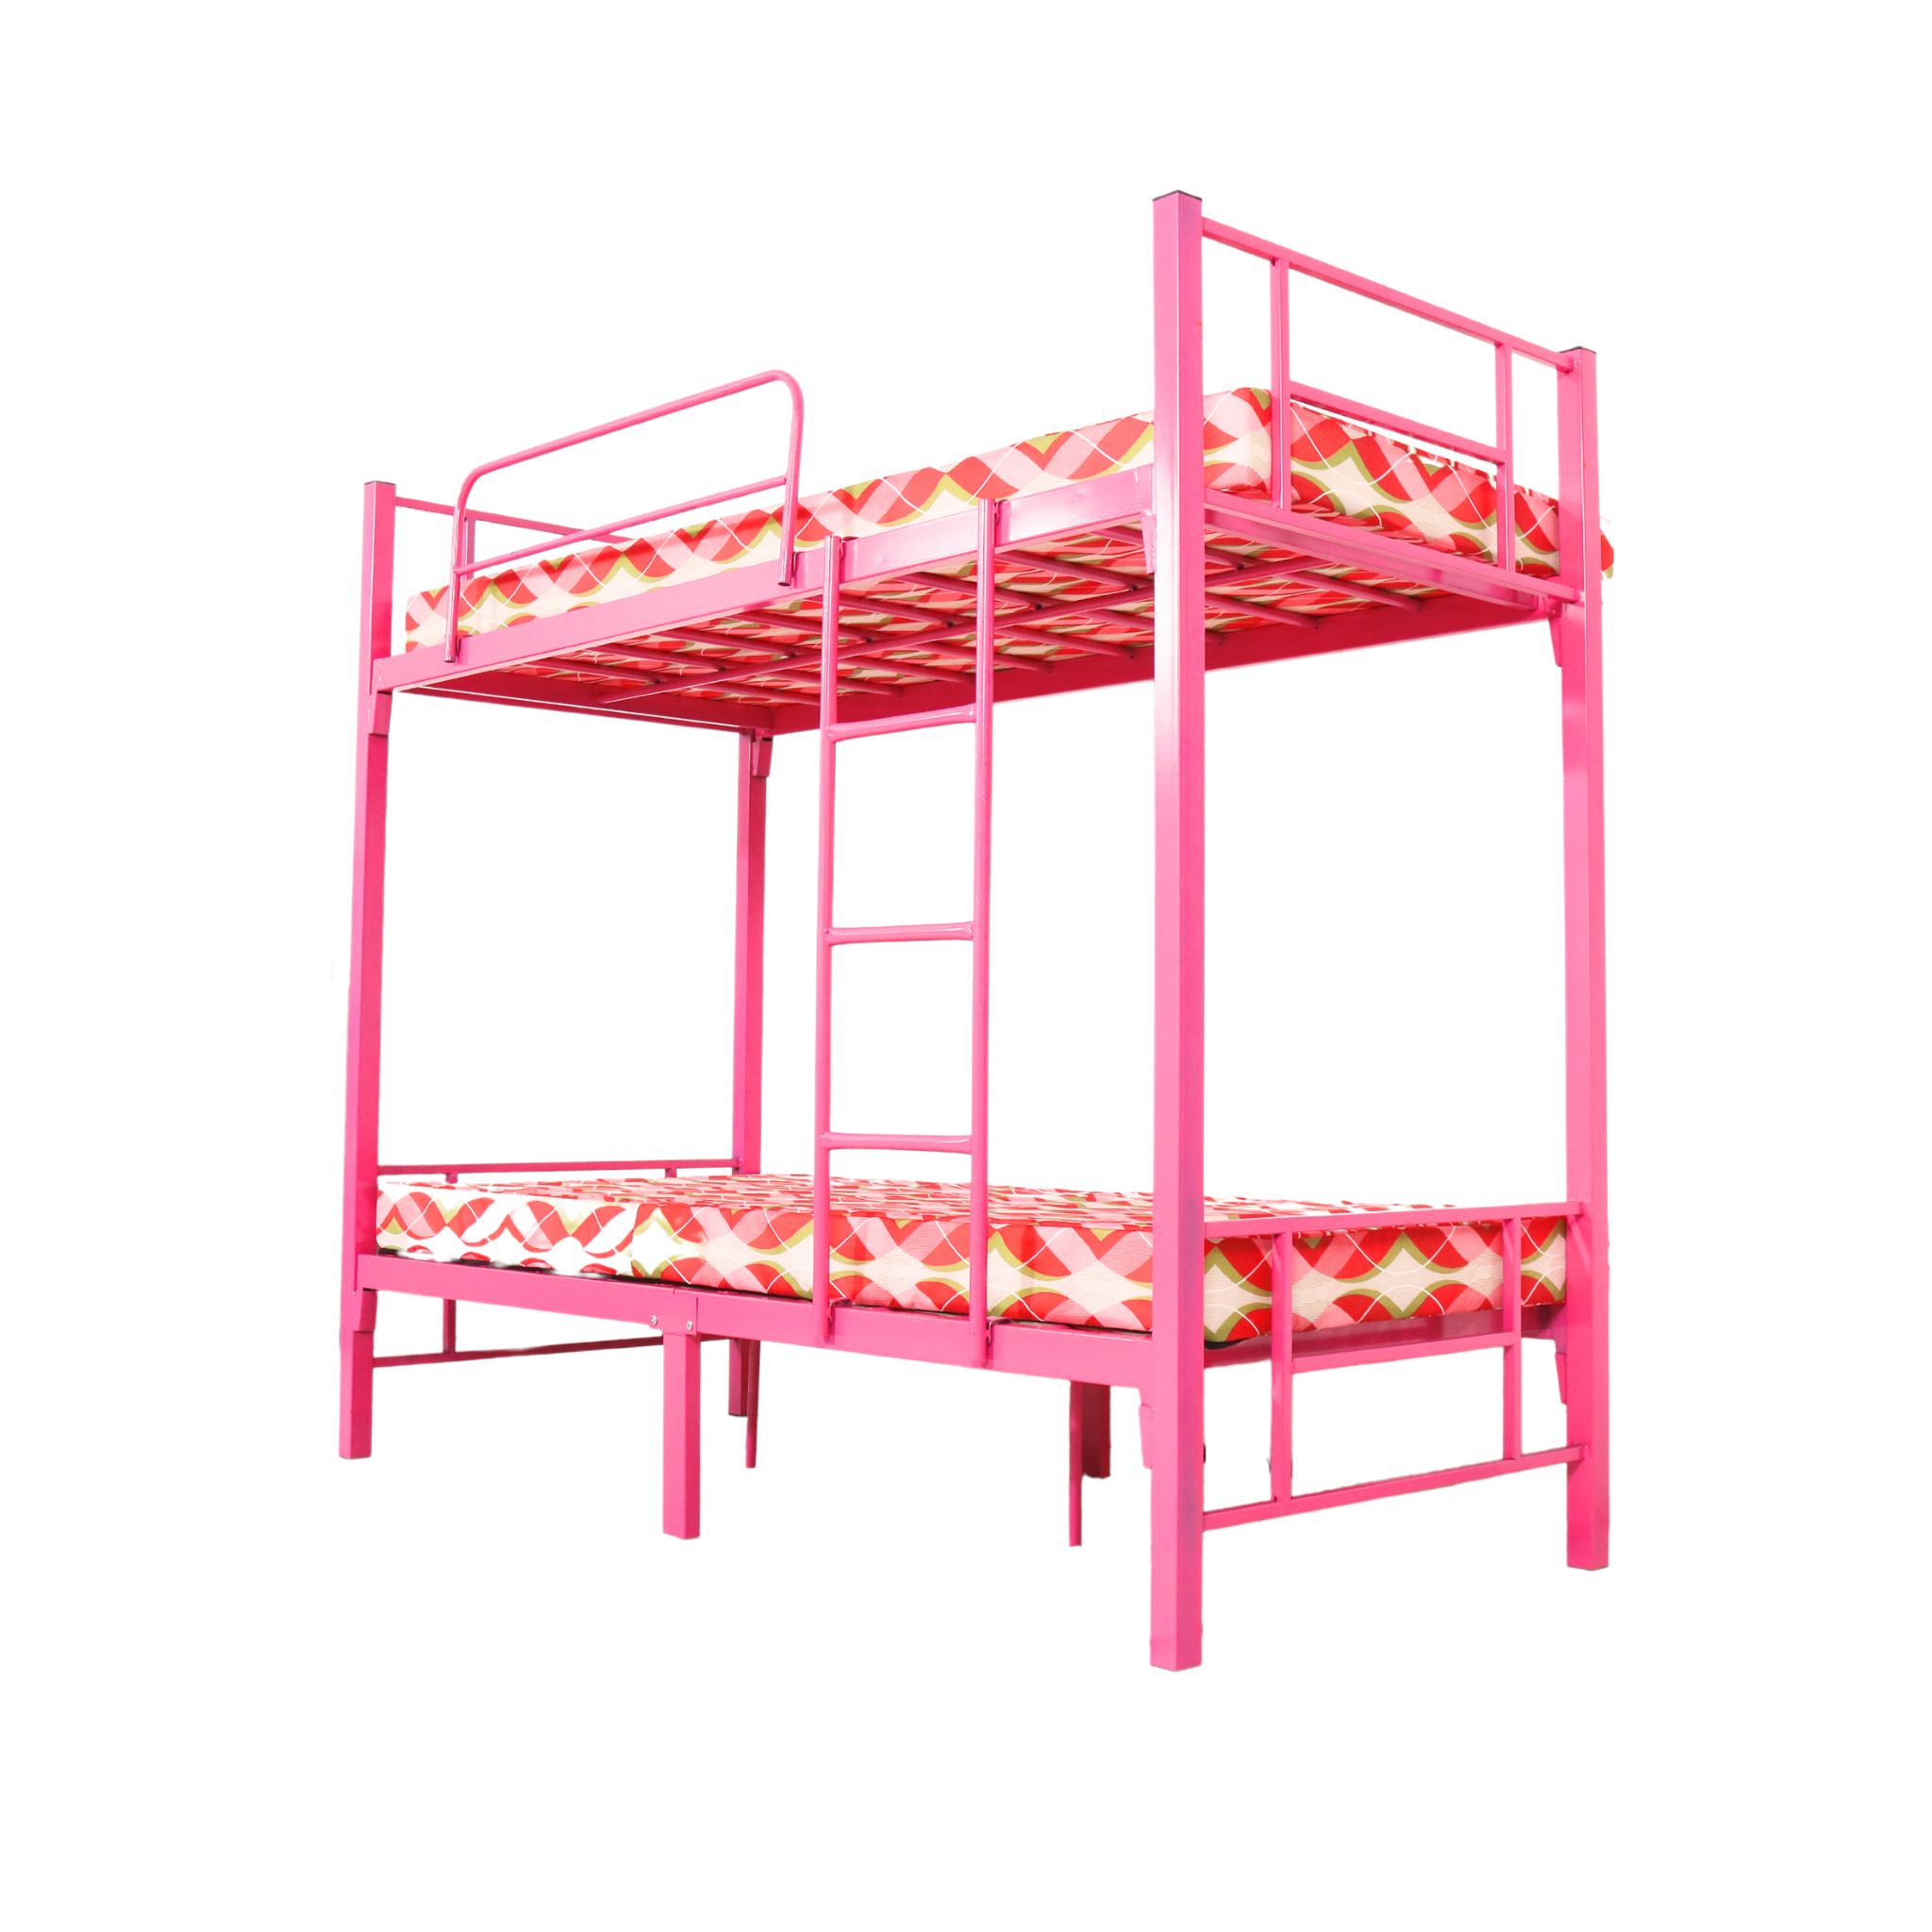 PIA Children Double Deck Bed with free matress AF Home